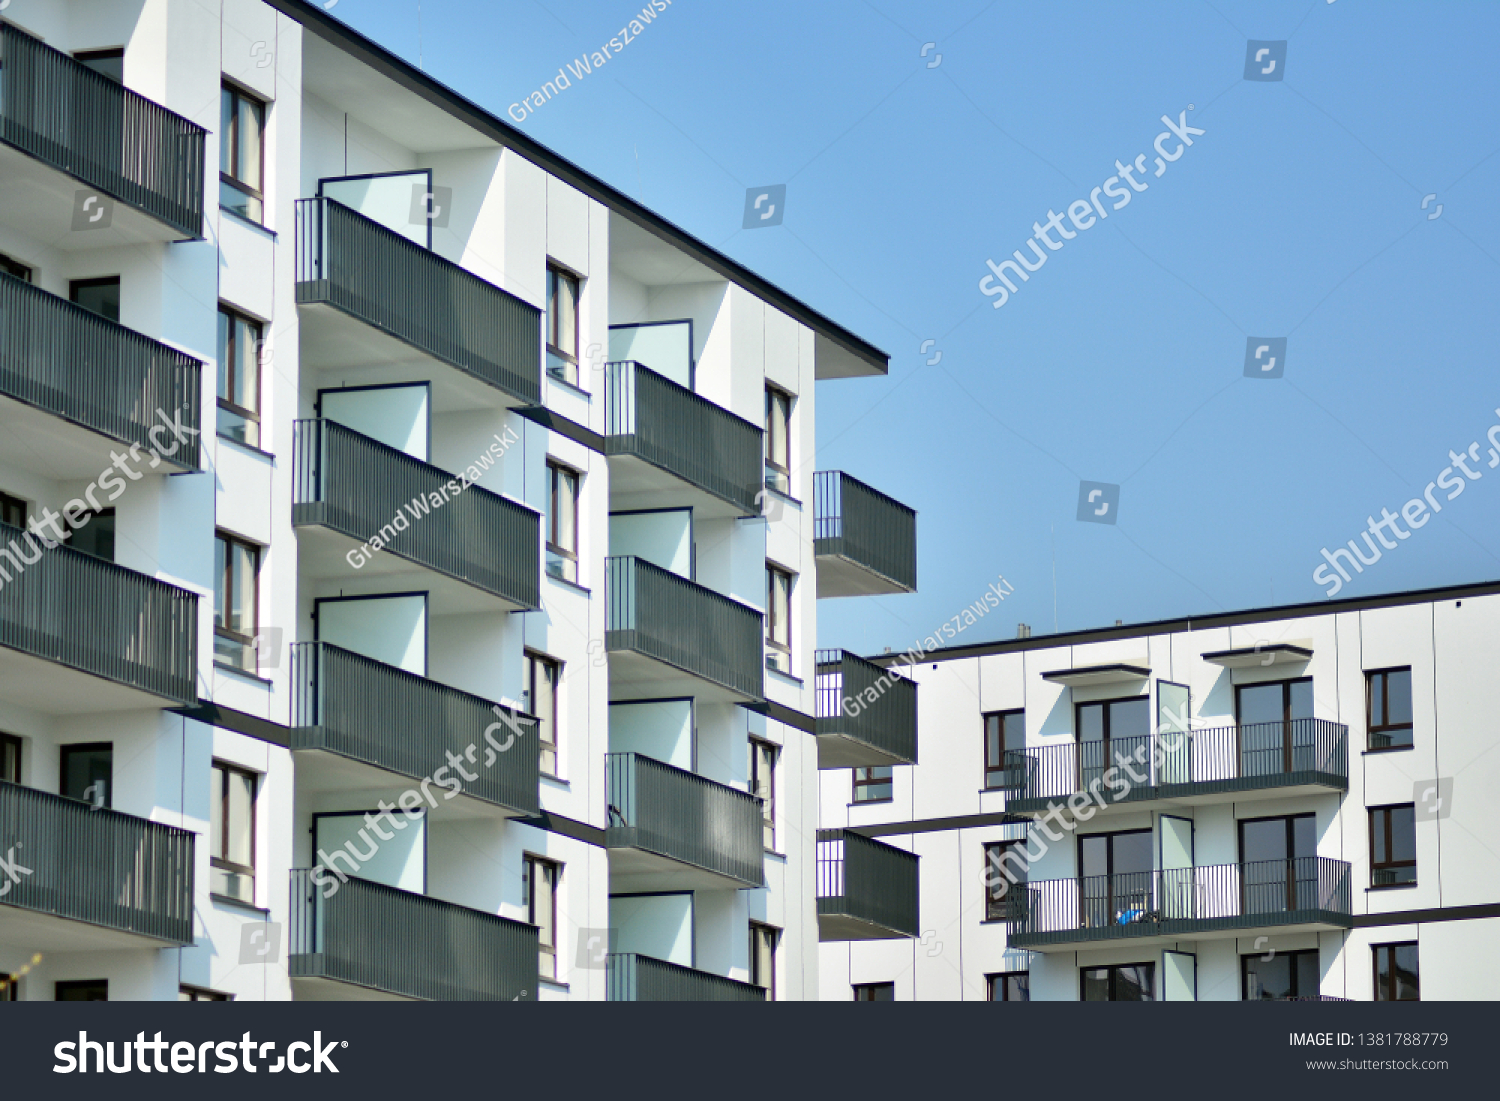 Architectural details of modern apartment building #1381788779